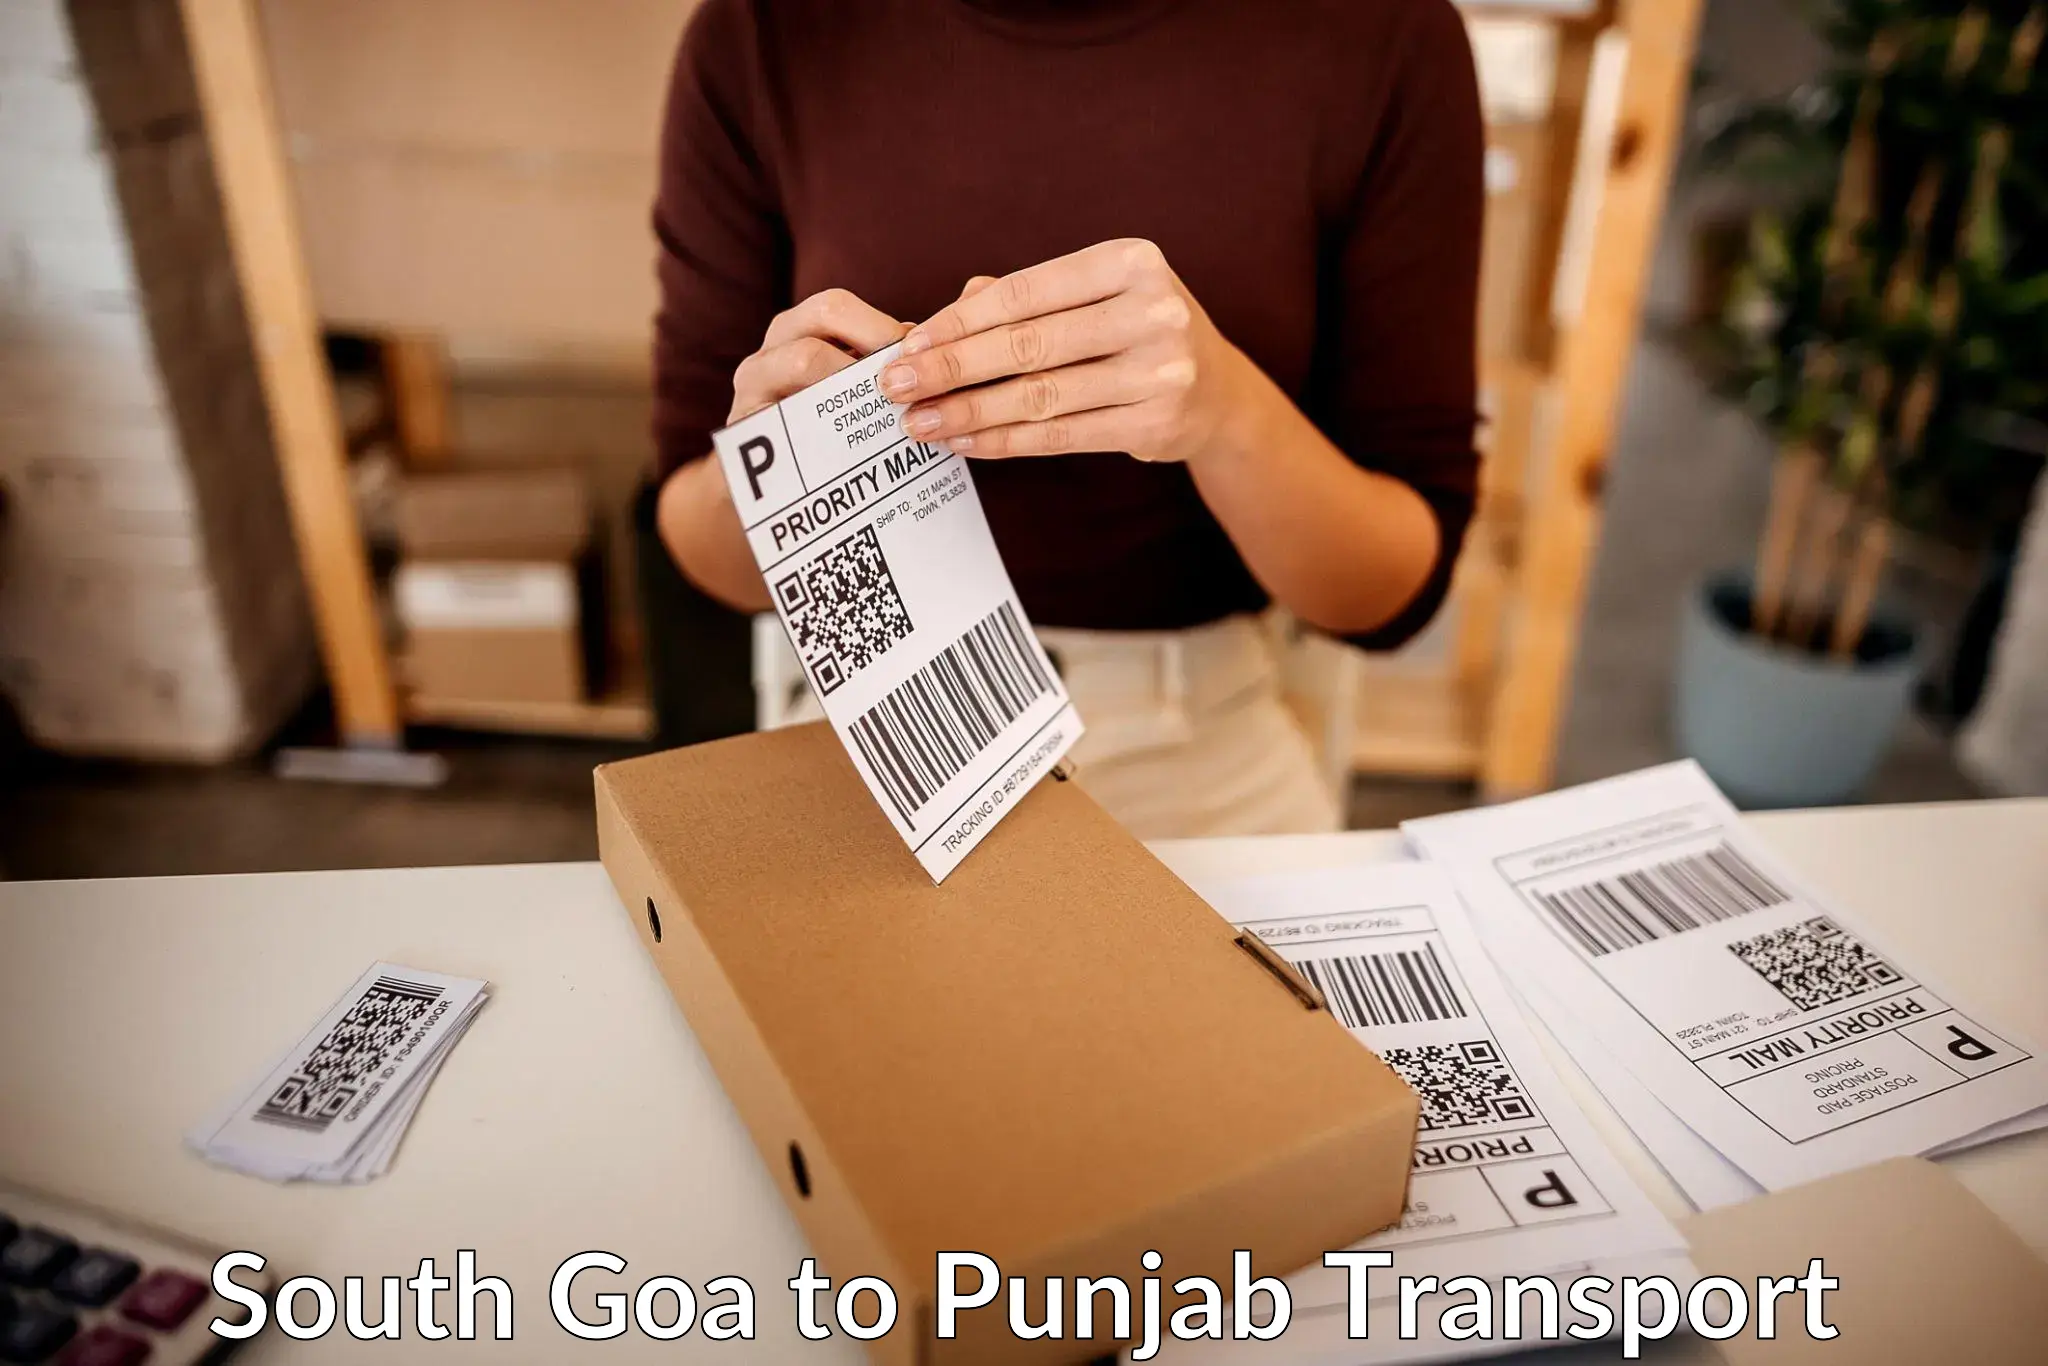 Commercial transport service South Goa to Gurdaspur